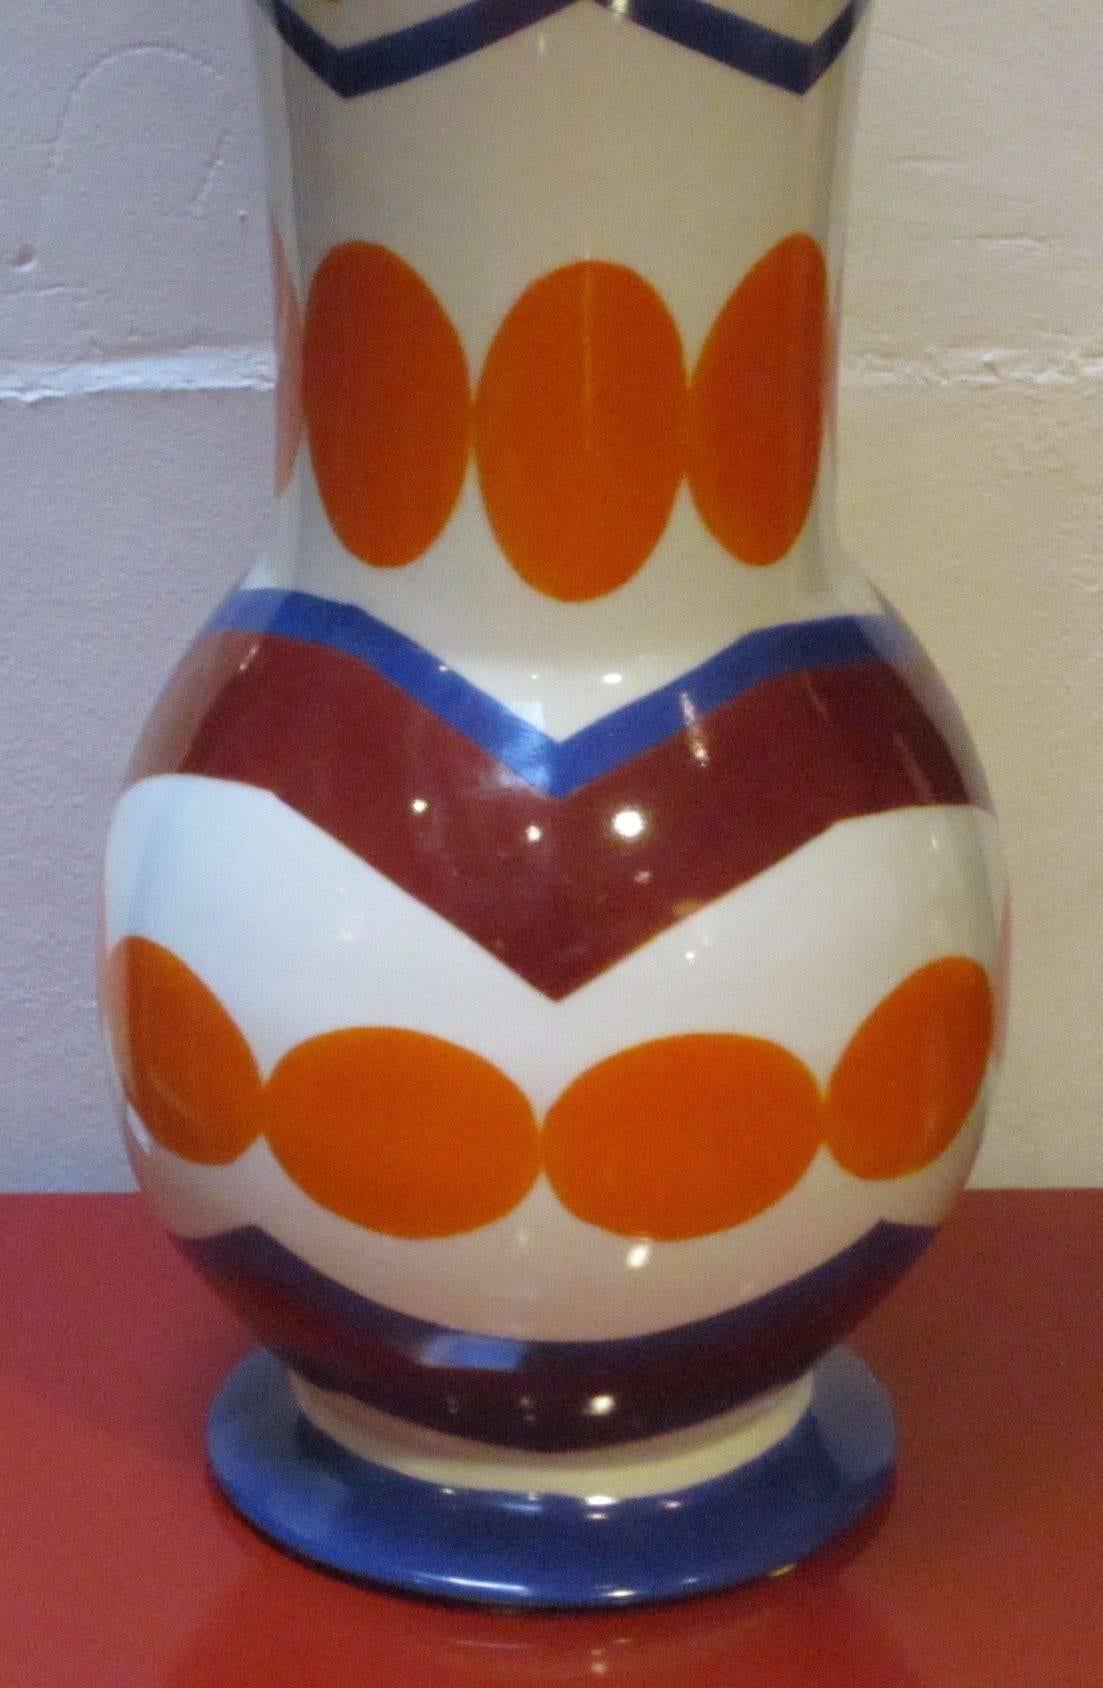 Chinese Bright Patterned White/Orange/Burgundy Vase by Frederic De Luca, Contemporary